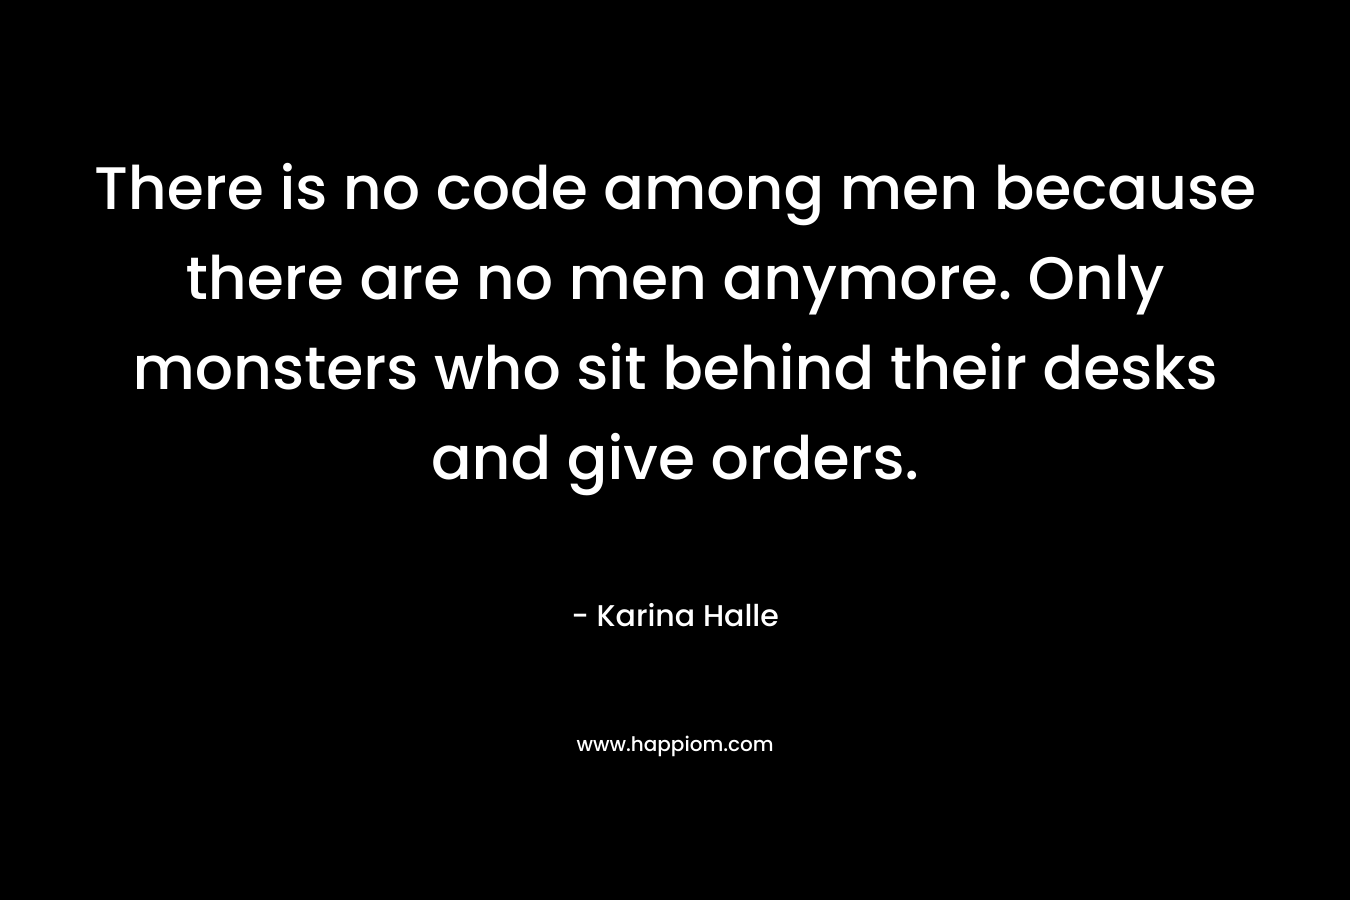 There is no code among men because there are no men anymore. Only monsters who sit behind their desks and give orders.